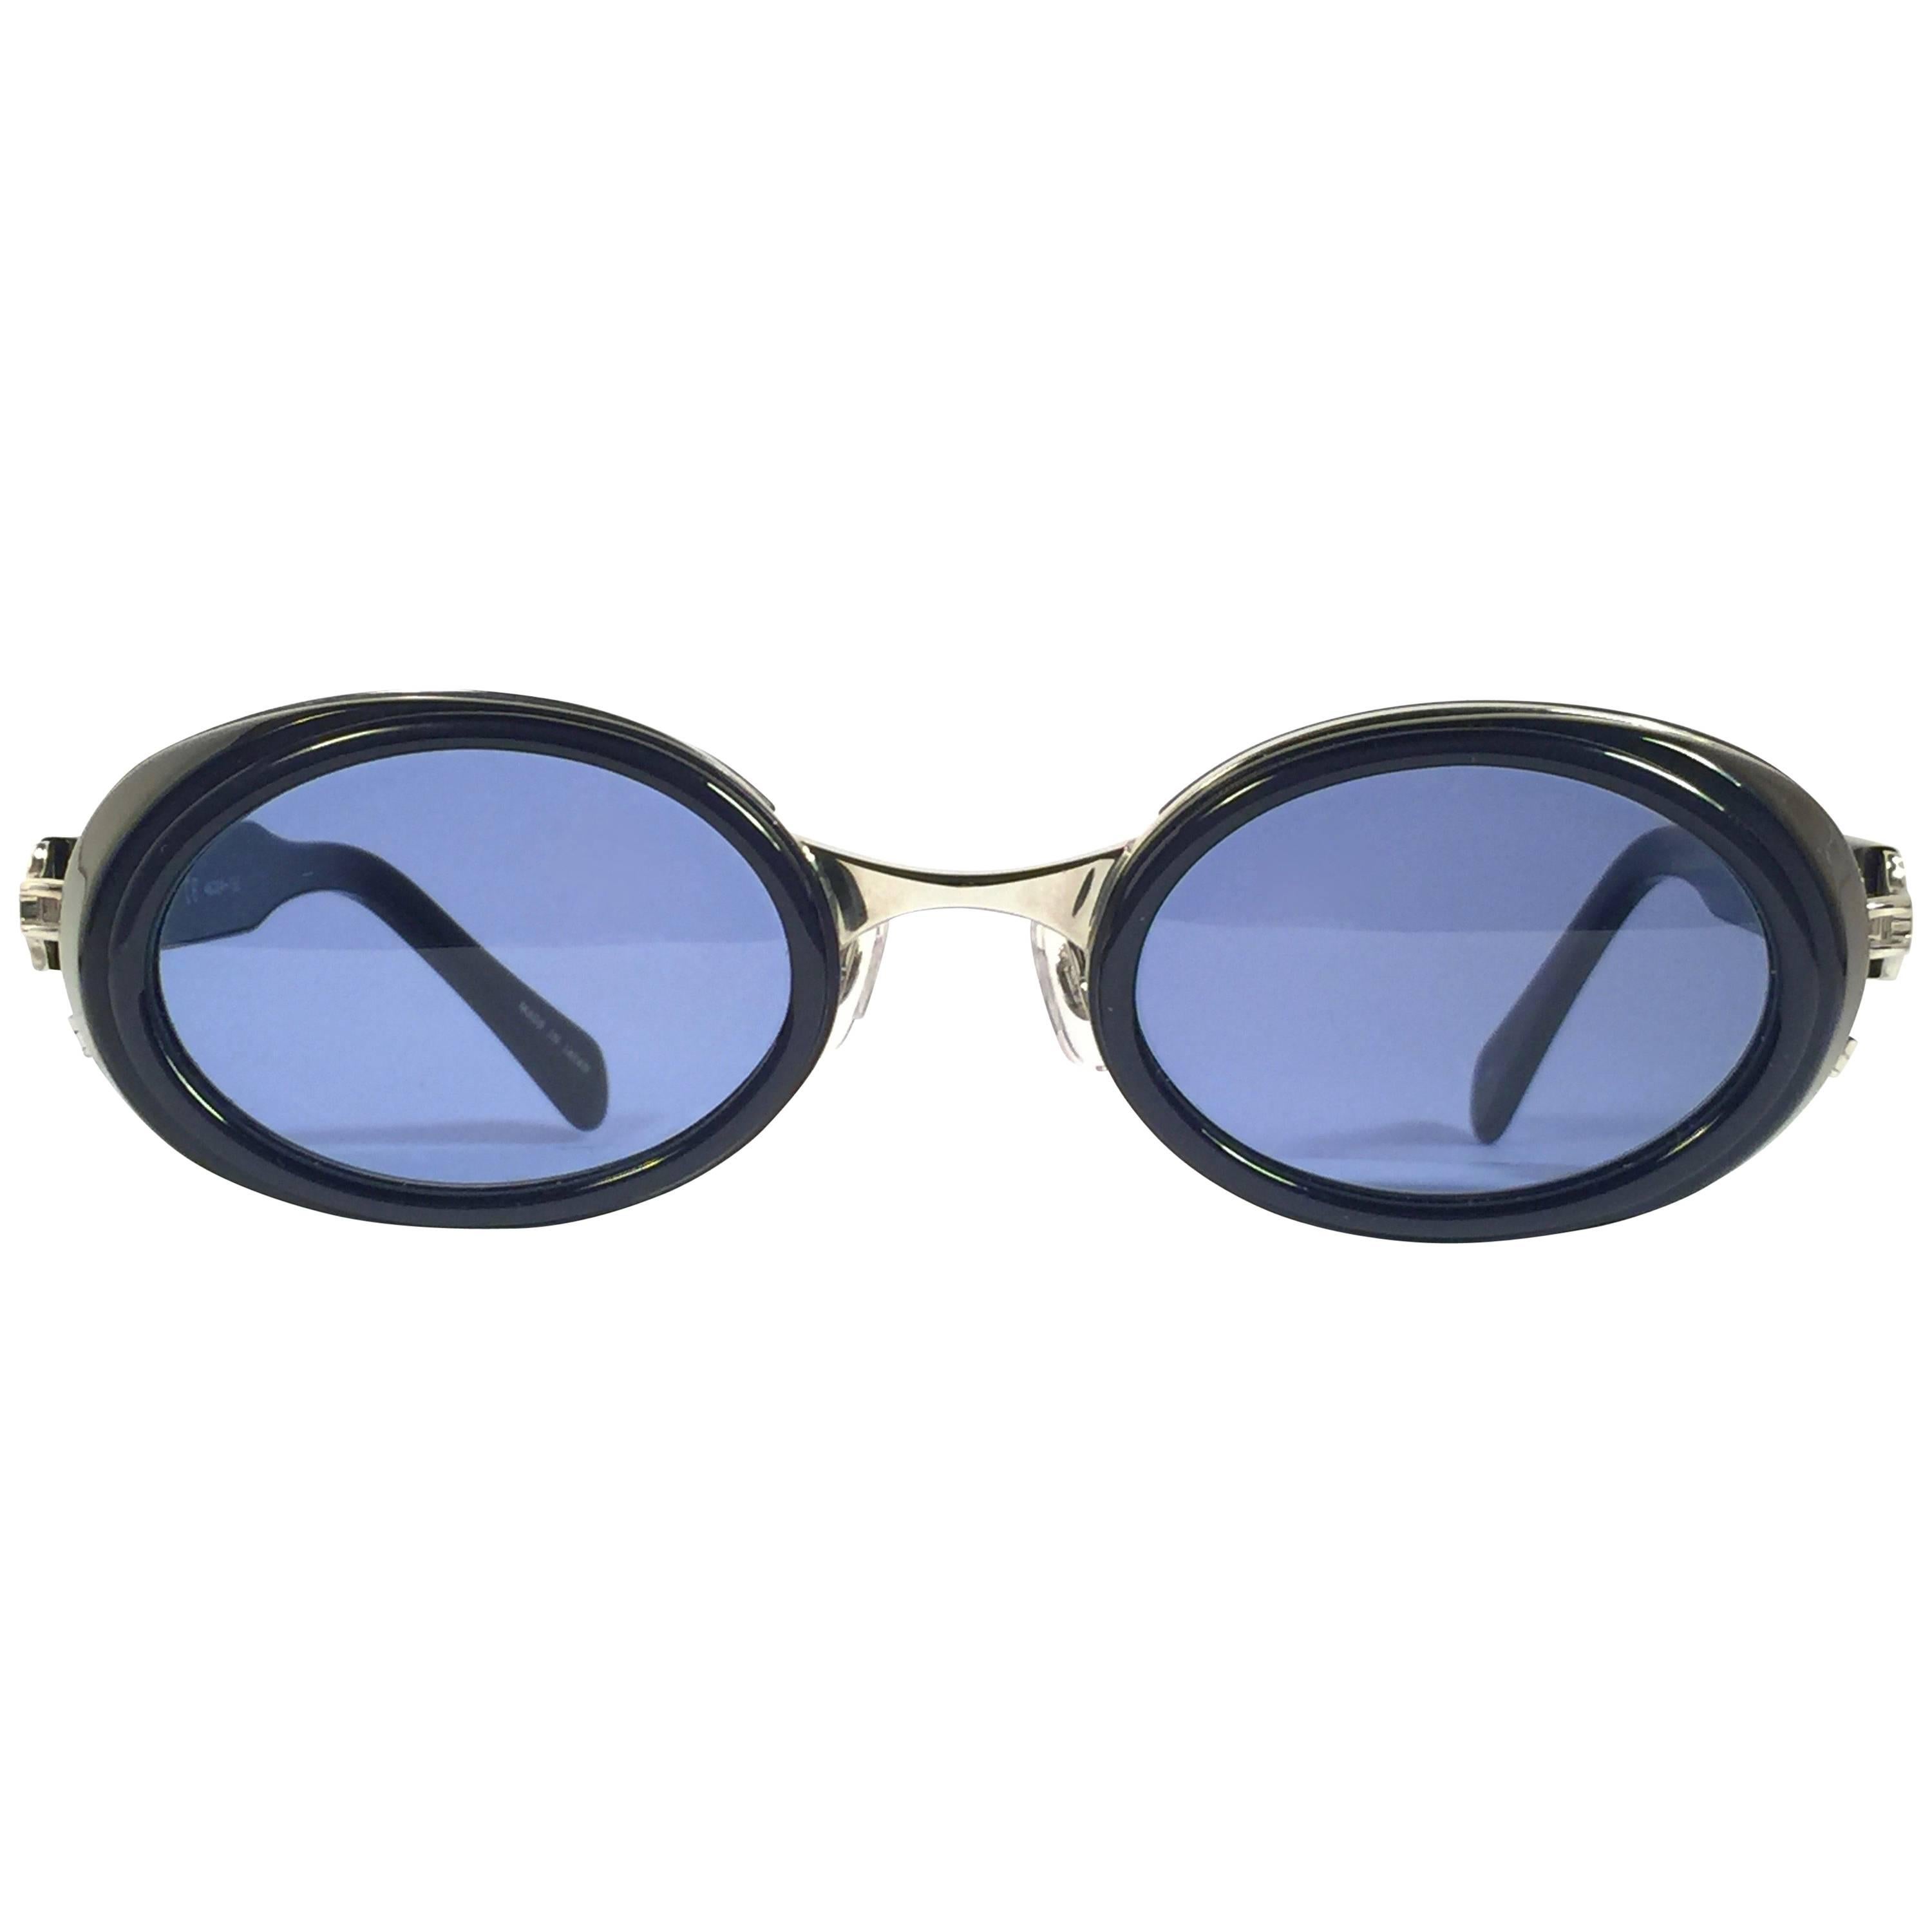 Cult brand Matsuda signed this ultra chic pair of dark blue with silver accents sunglasses. 

Spotless medium blue lenses.

Superior quality and design. 

New, never worn or displayed. This item may show minor sign of wear due to storage. Made in